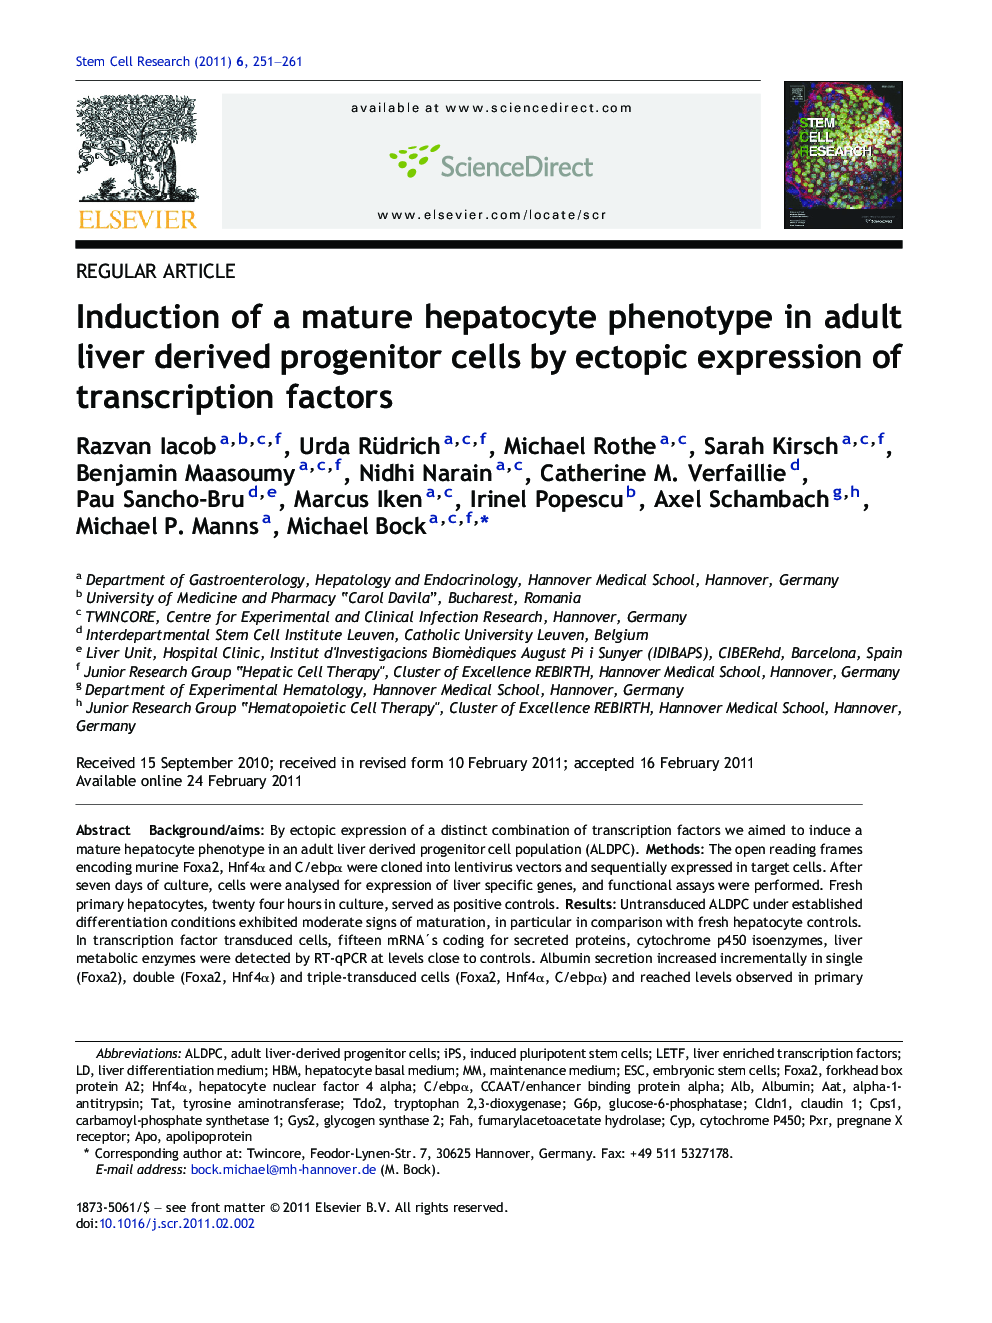 Induction of a mature hepatocyte phenotype in adult liver derived progenitor cells by ectopic expression of transcription factors